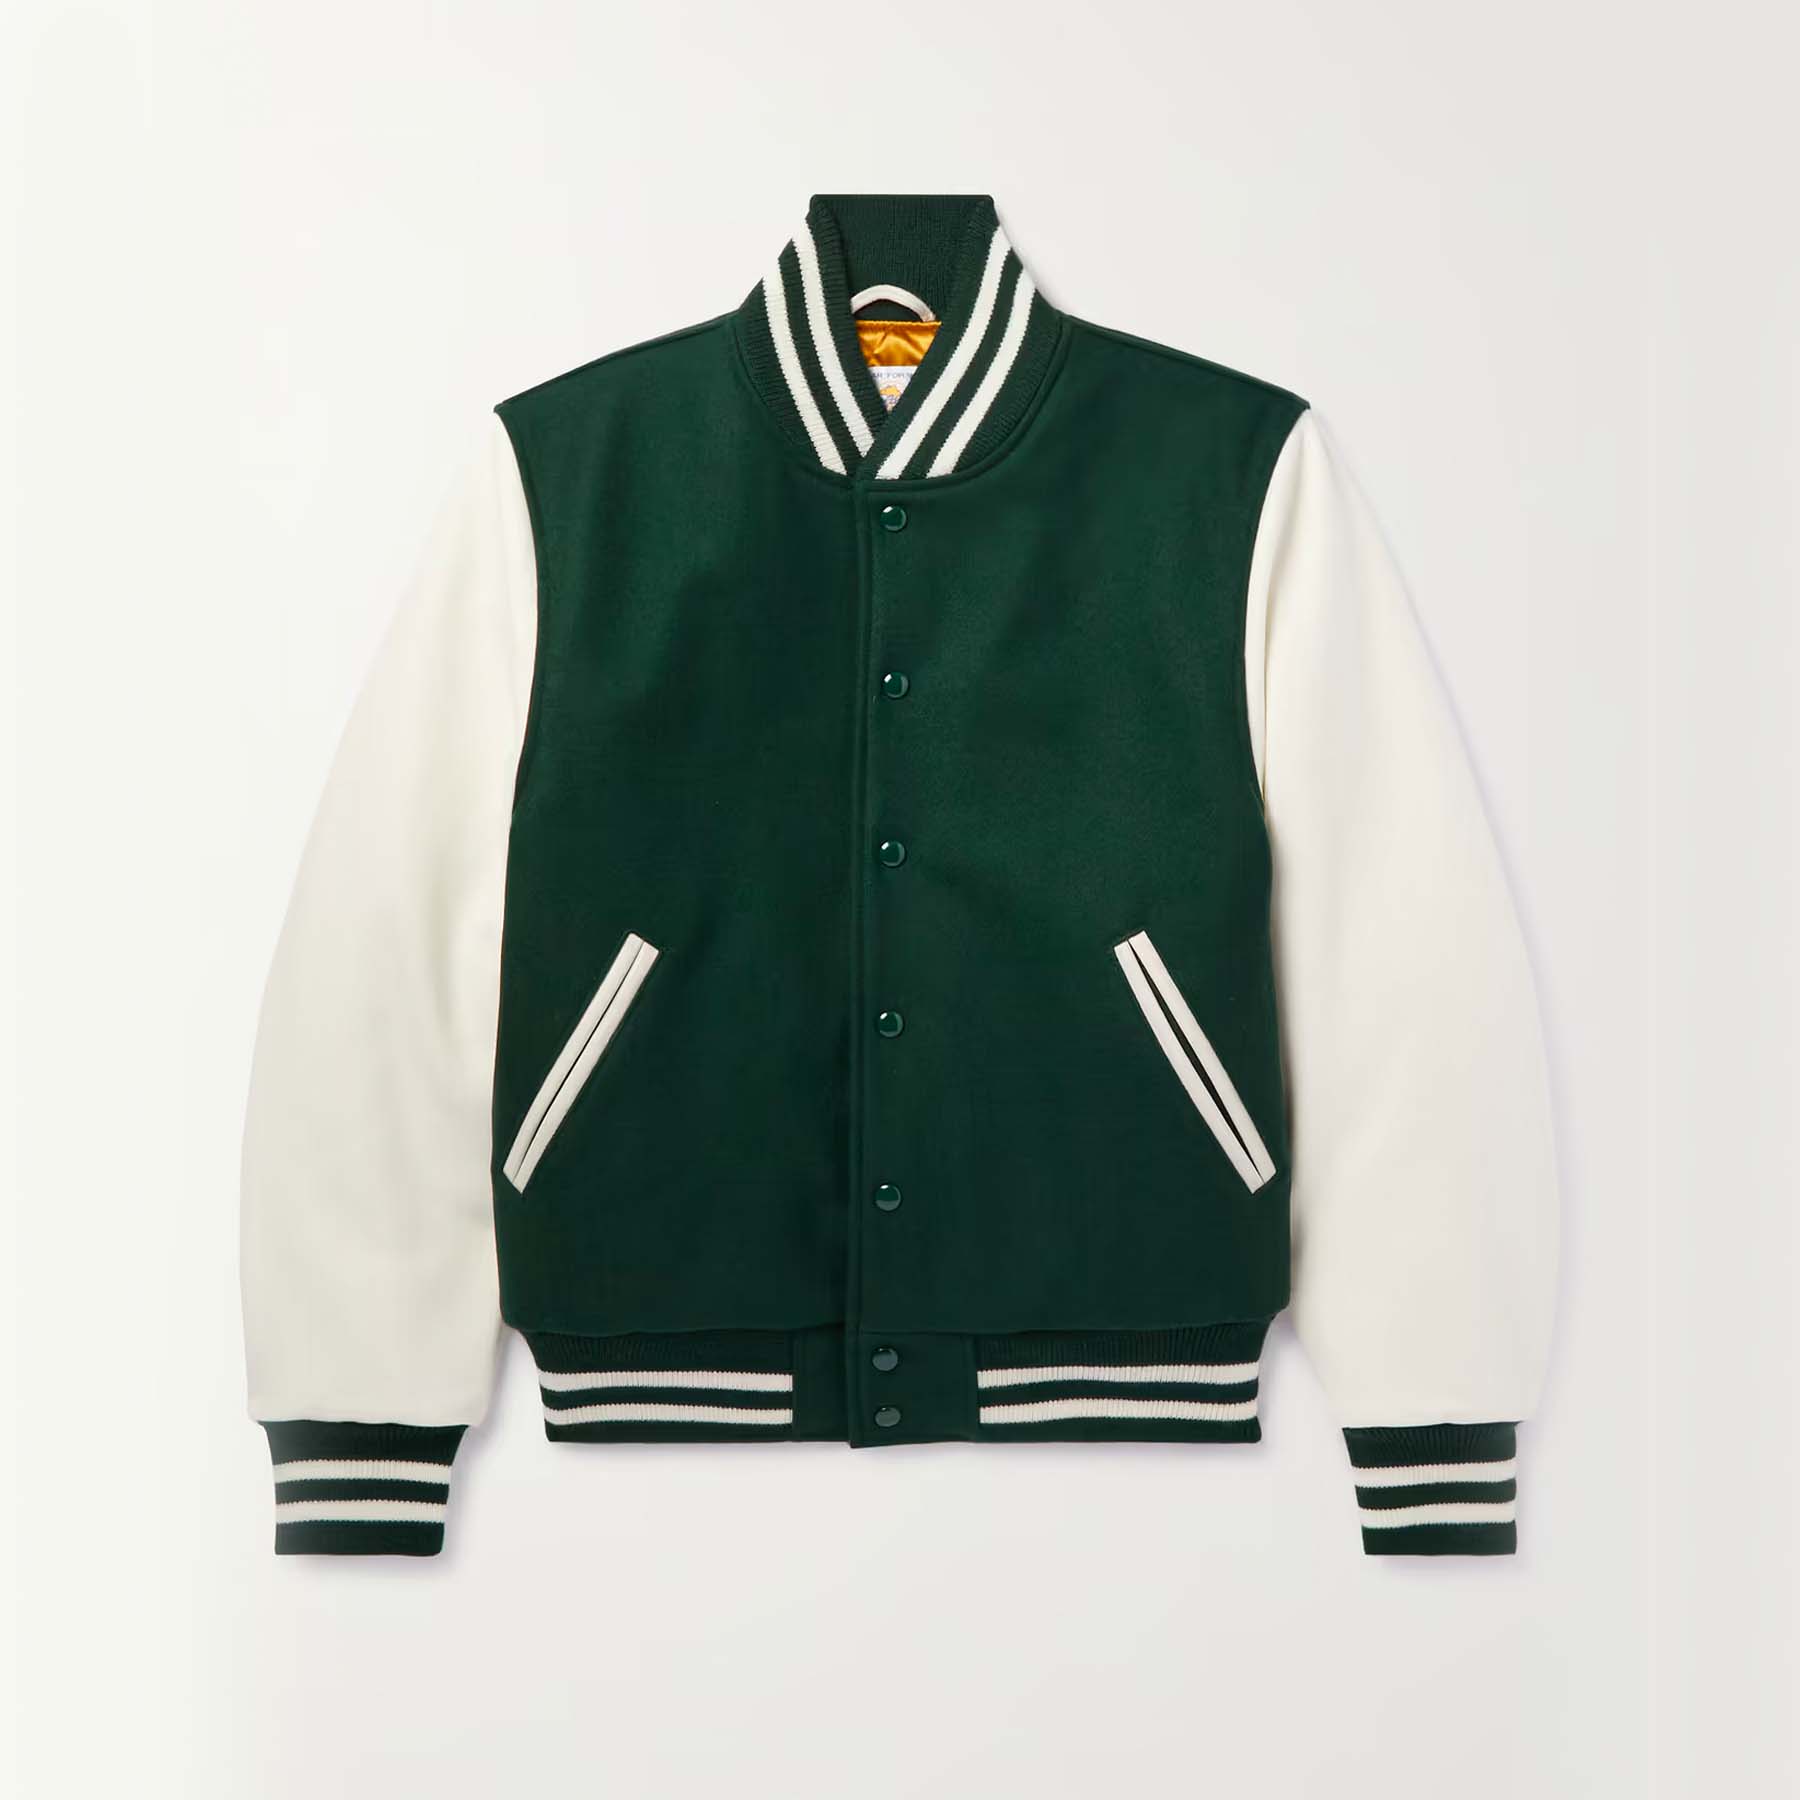 15 Varsity Jackets That Will Make You a Hometown Hero (Or at Least Look  Like One)